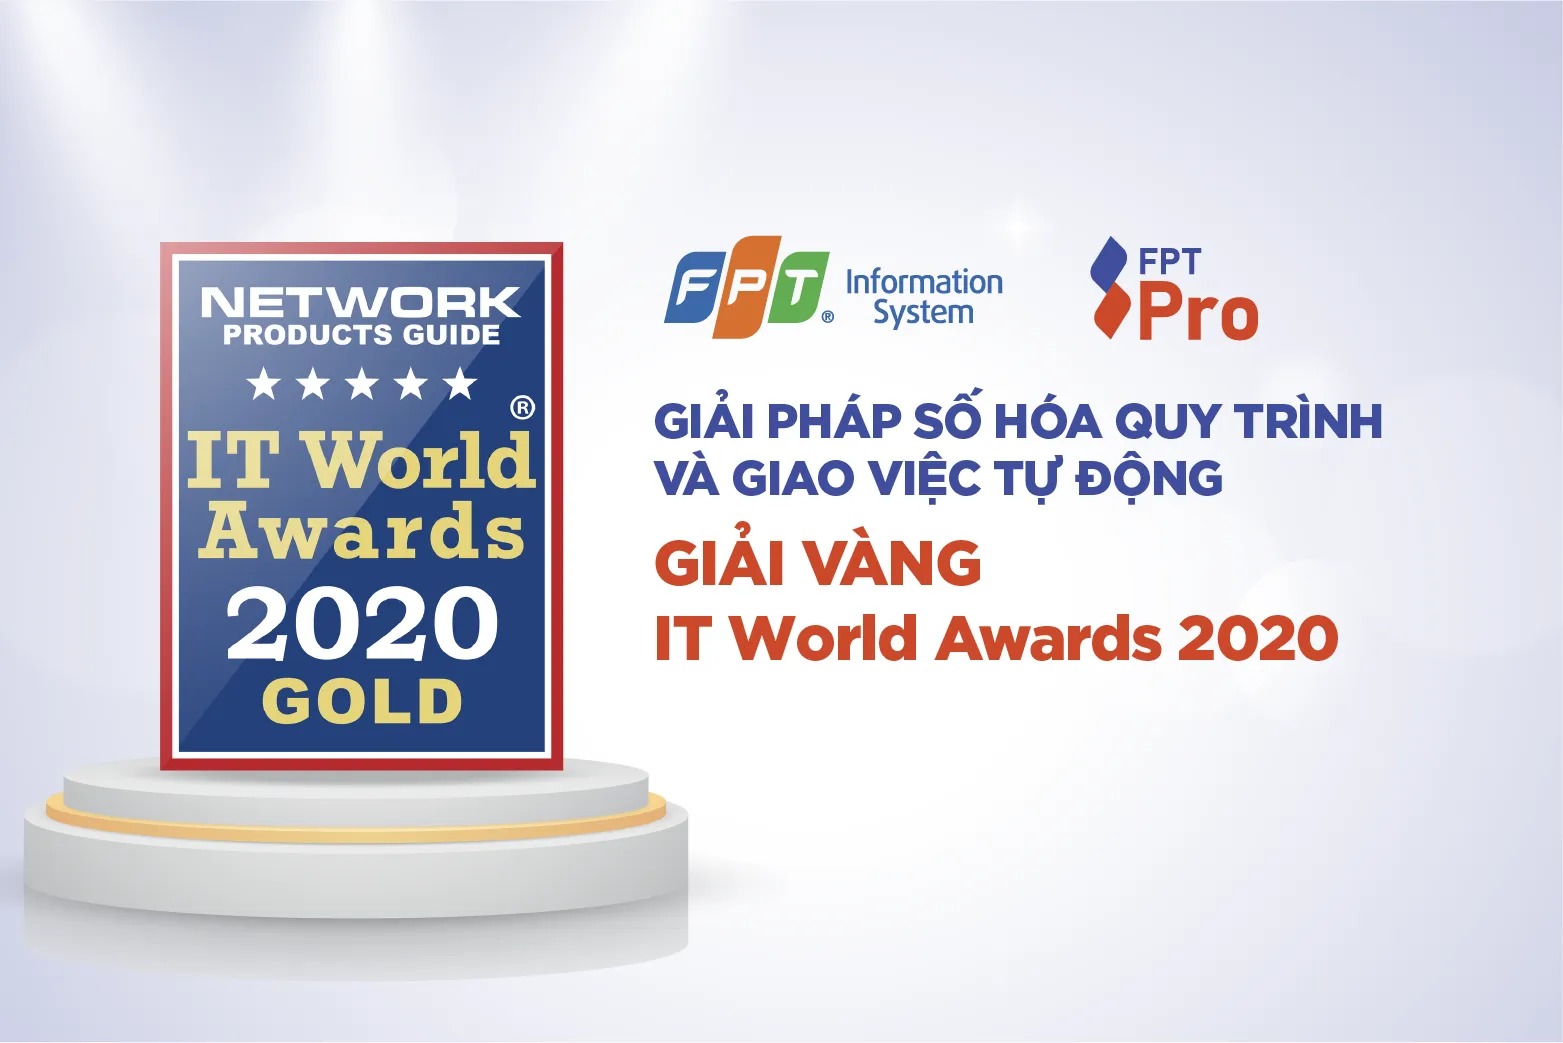 2020 IT World Awards – Gold Award – Process Digitalization and Automatic Assignment Solution (FPT SPro)